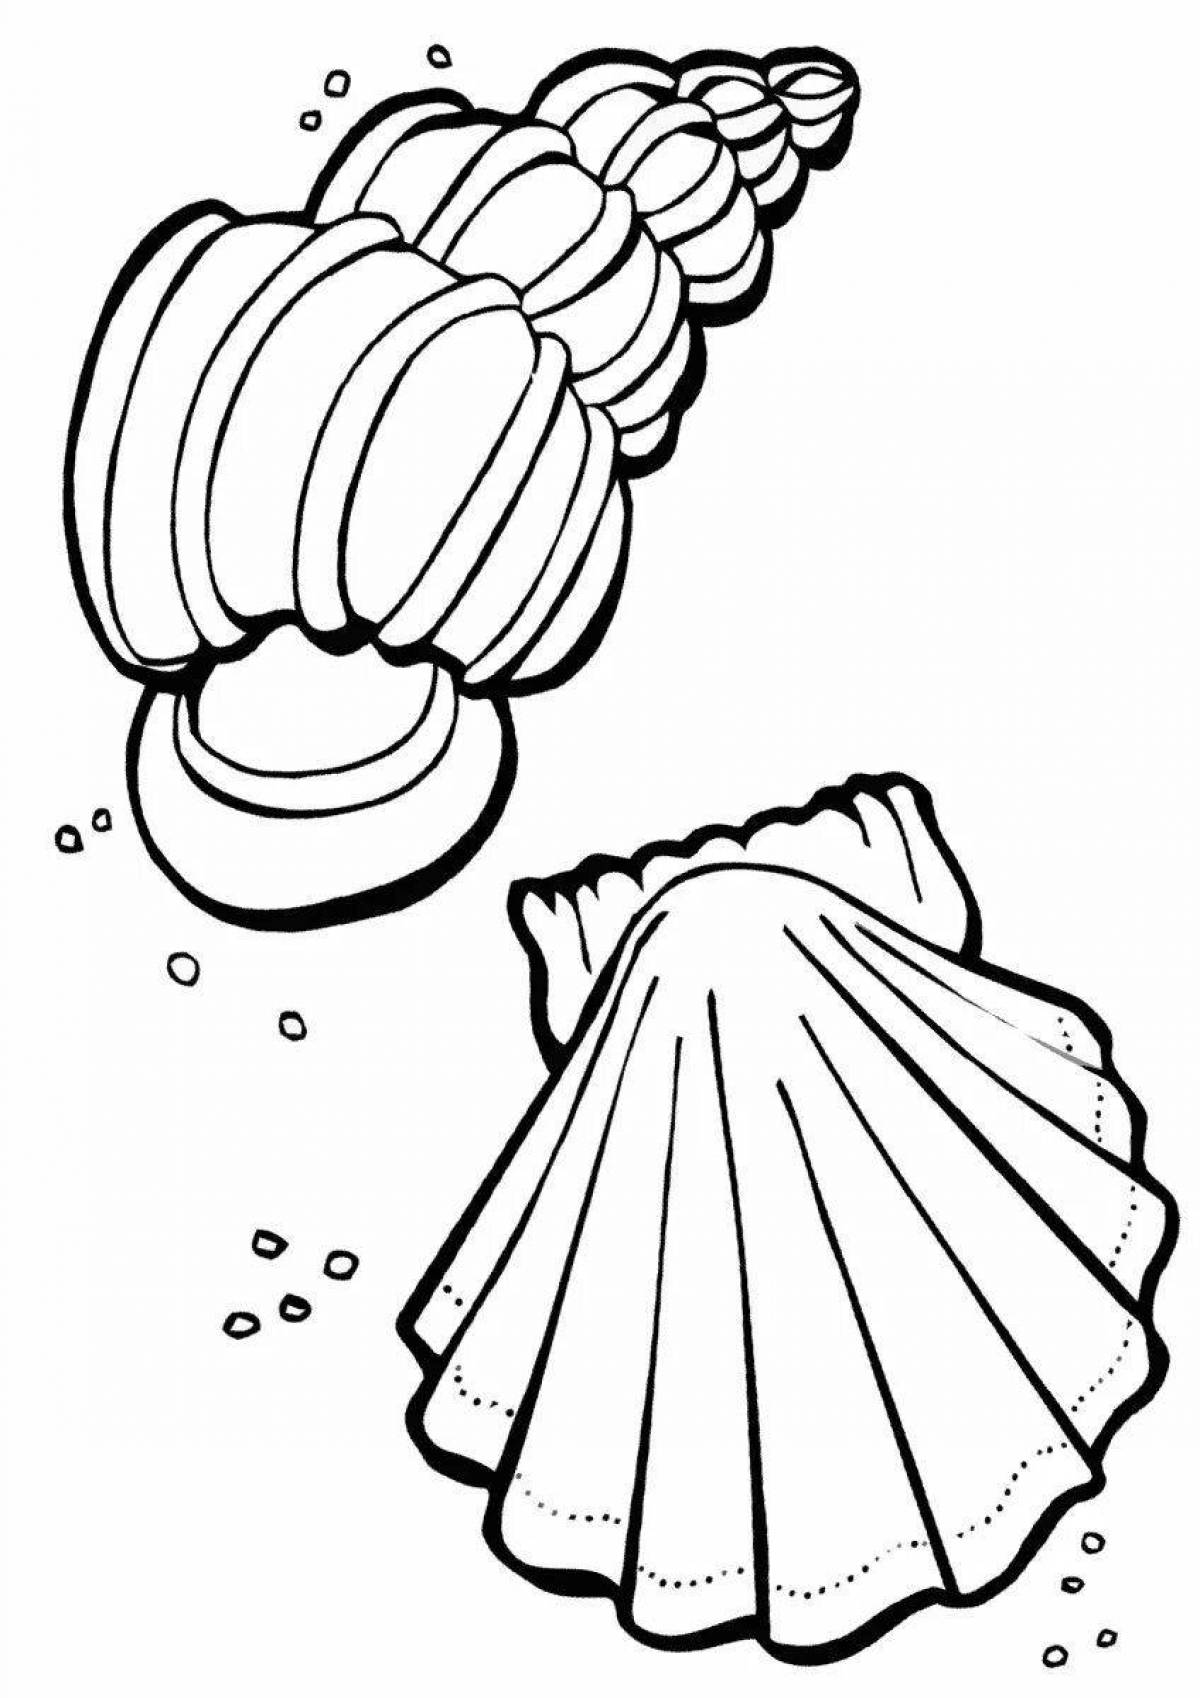 Adorable shell coloring book for kids